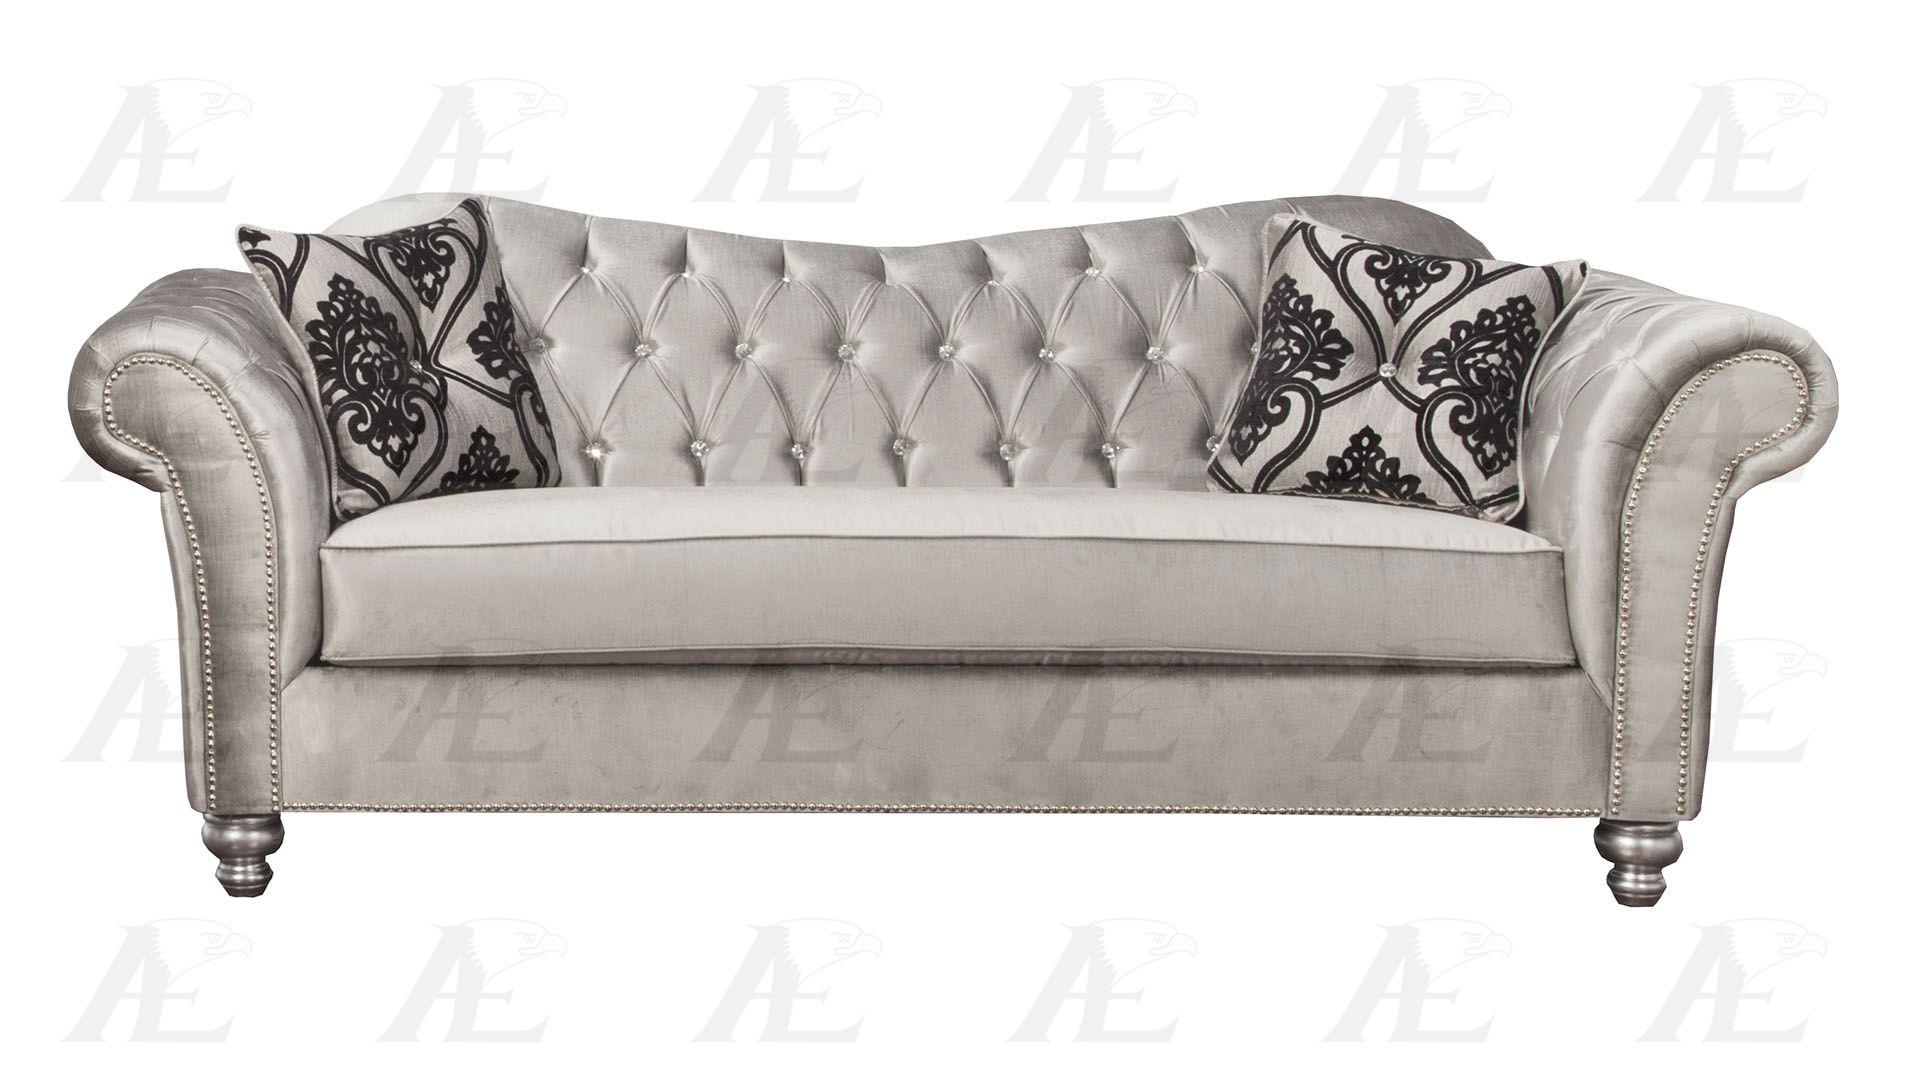 

    
American Eagle Furniture AE2600-S Silver Tufted Sofa and Loveseat Set Fabric Contemporary 2Pcs
